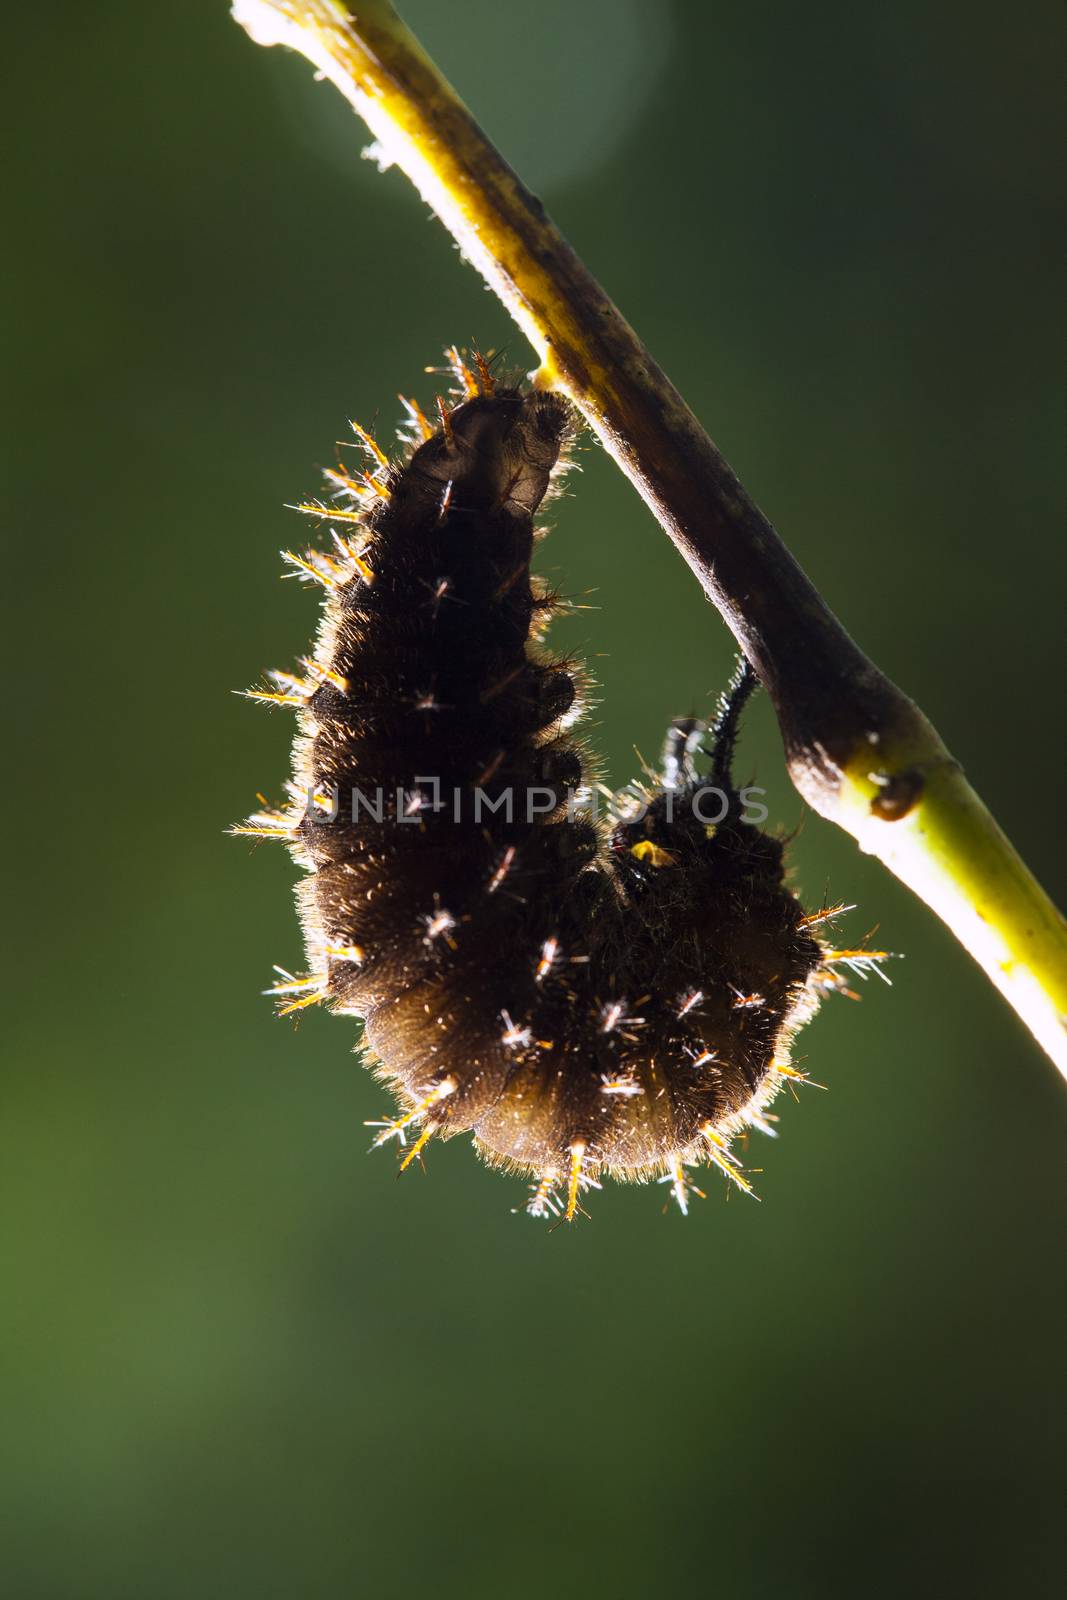 Close up of the caterpillar (Papilio dehaanii) on a leaf by jee1999